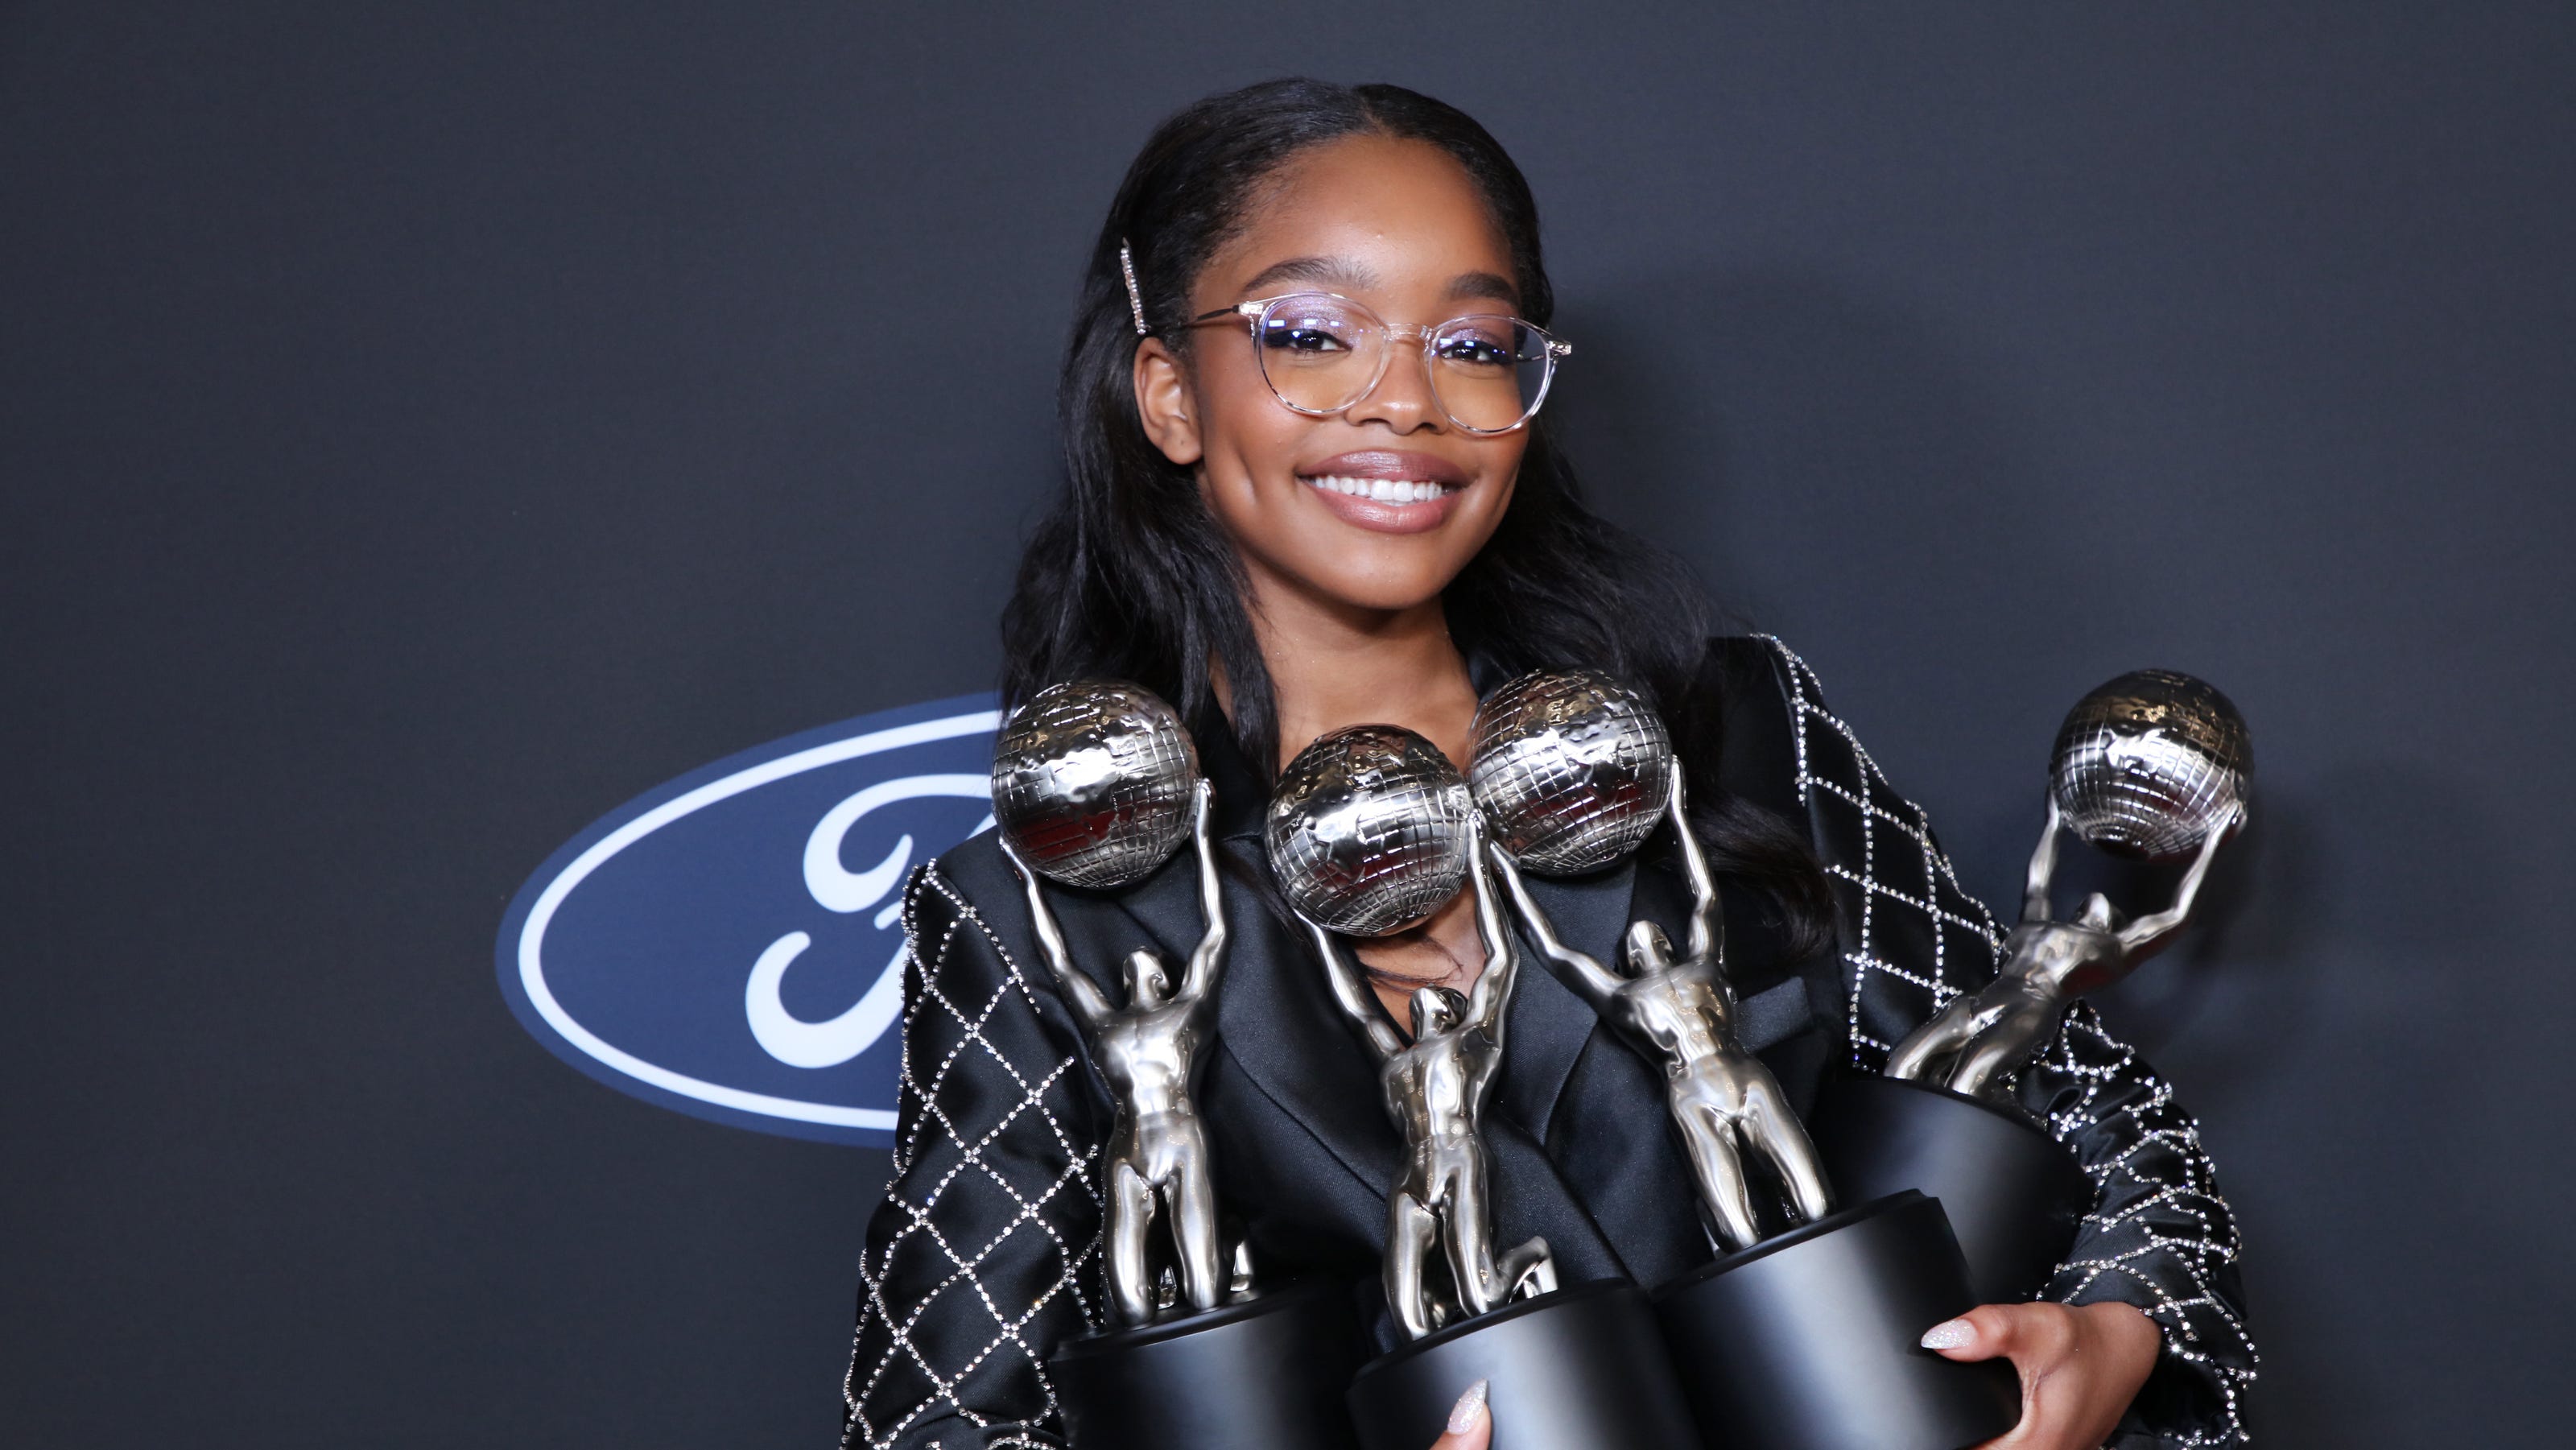 Marsai Martin 15 Responds To Trolls Attacking Her Appearance